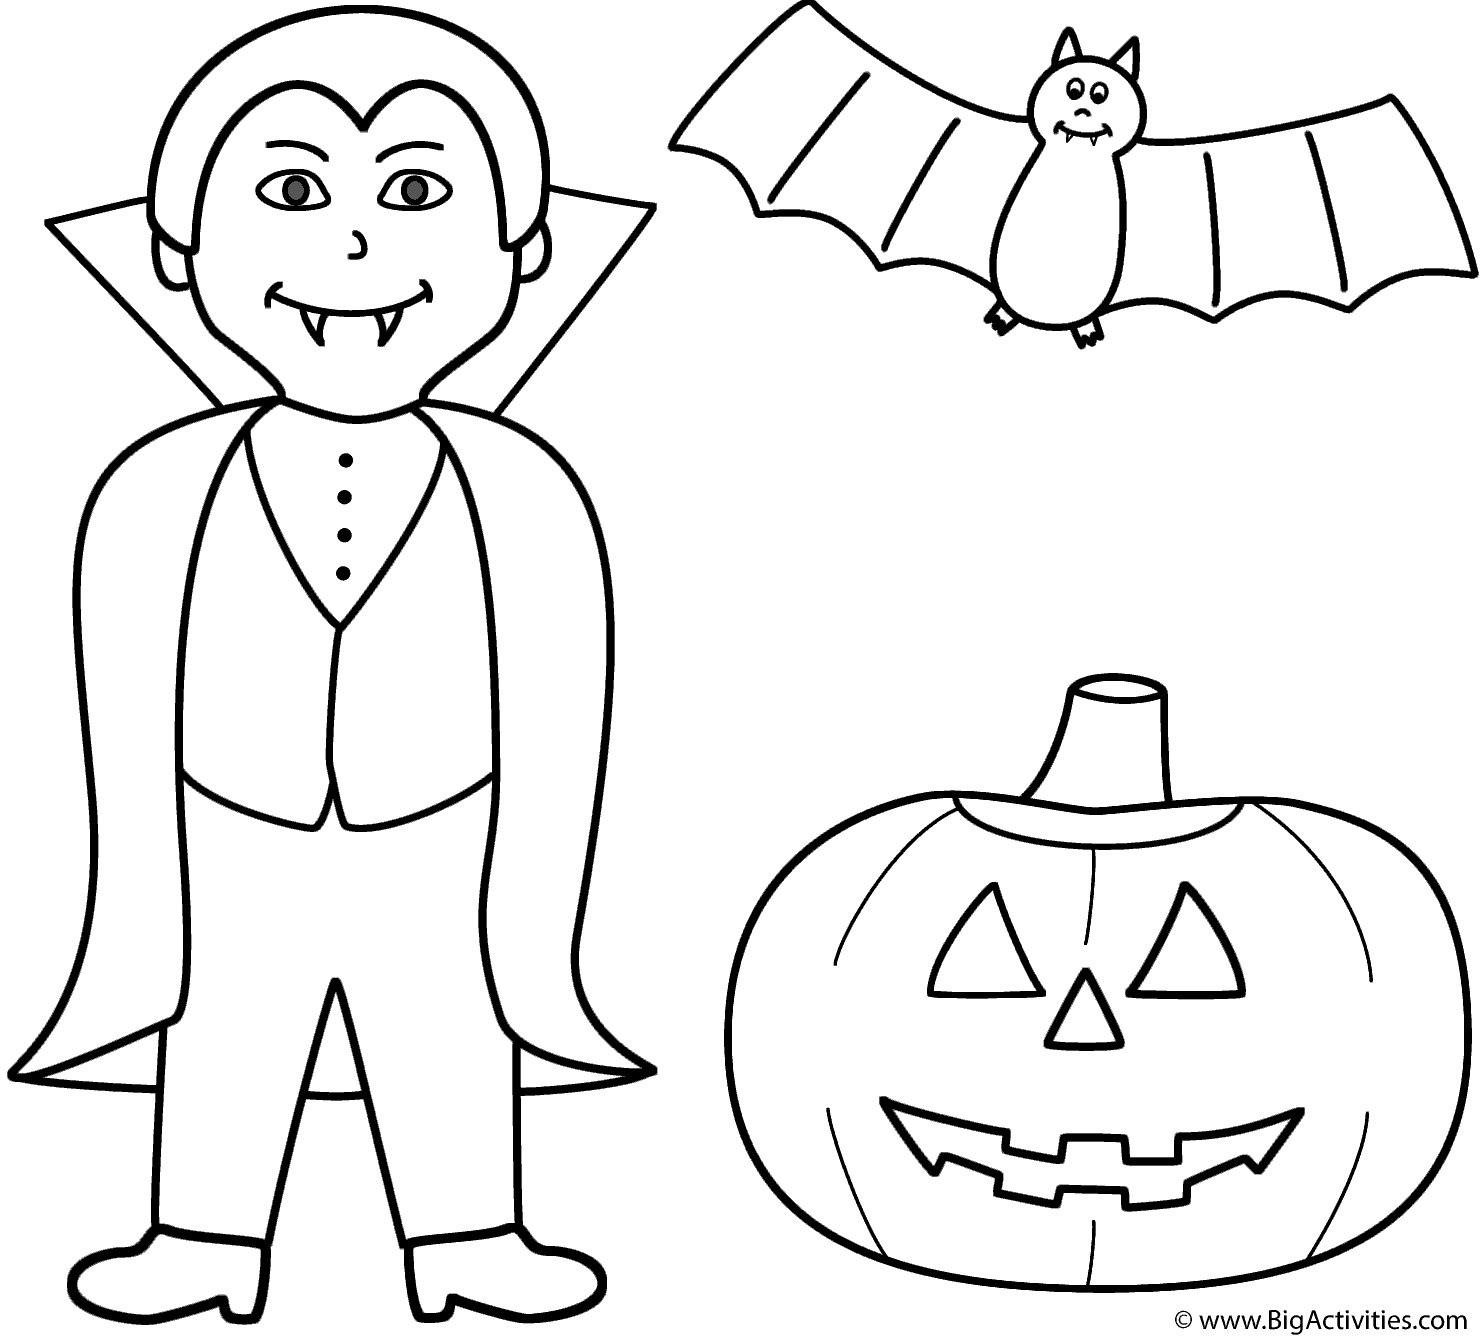 Happy Halloween Coloring Book For Kids Ages 4-8 : A Halloween coloring  books for toddlers with Horror Vampires, Bats, Ghost, Pumpkins High-Quality